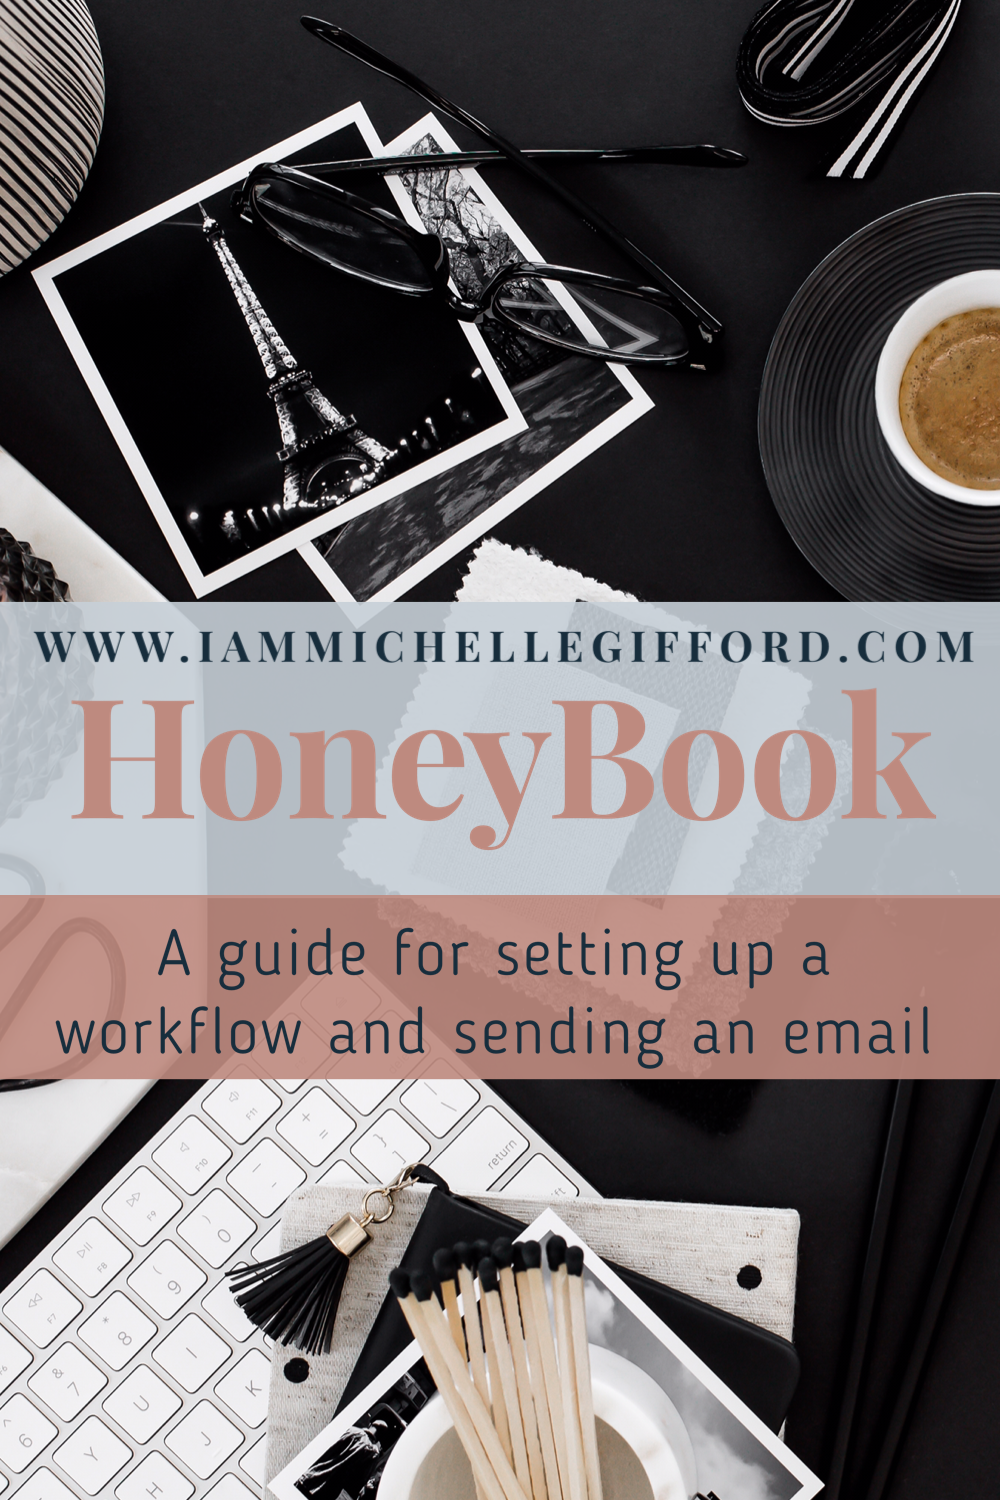 How to Set Up a Workflow and Send an Email with HoneyBook A step by step guide www.iammichellegifford.com